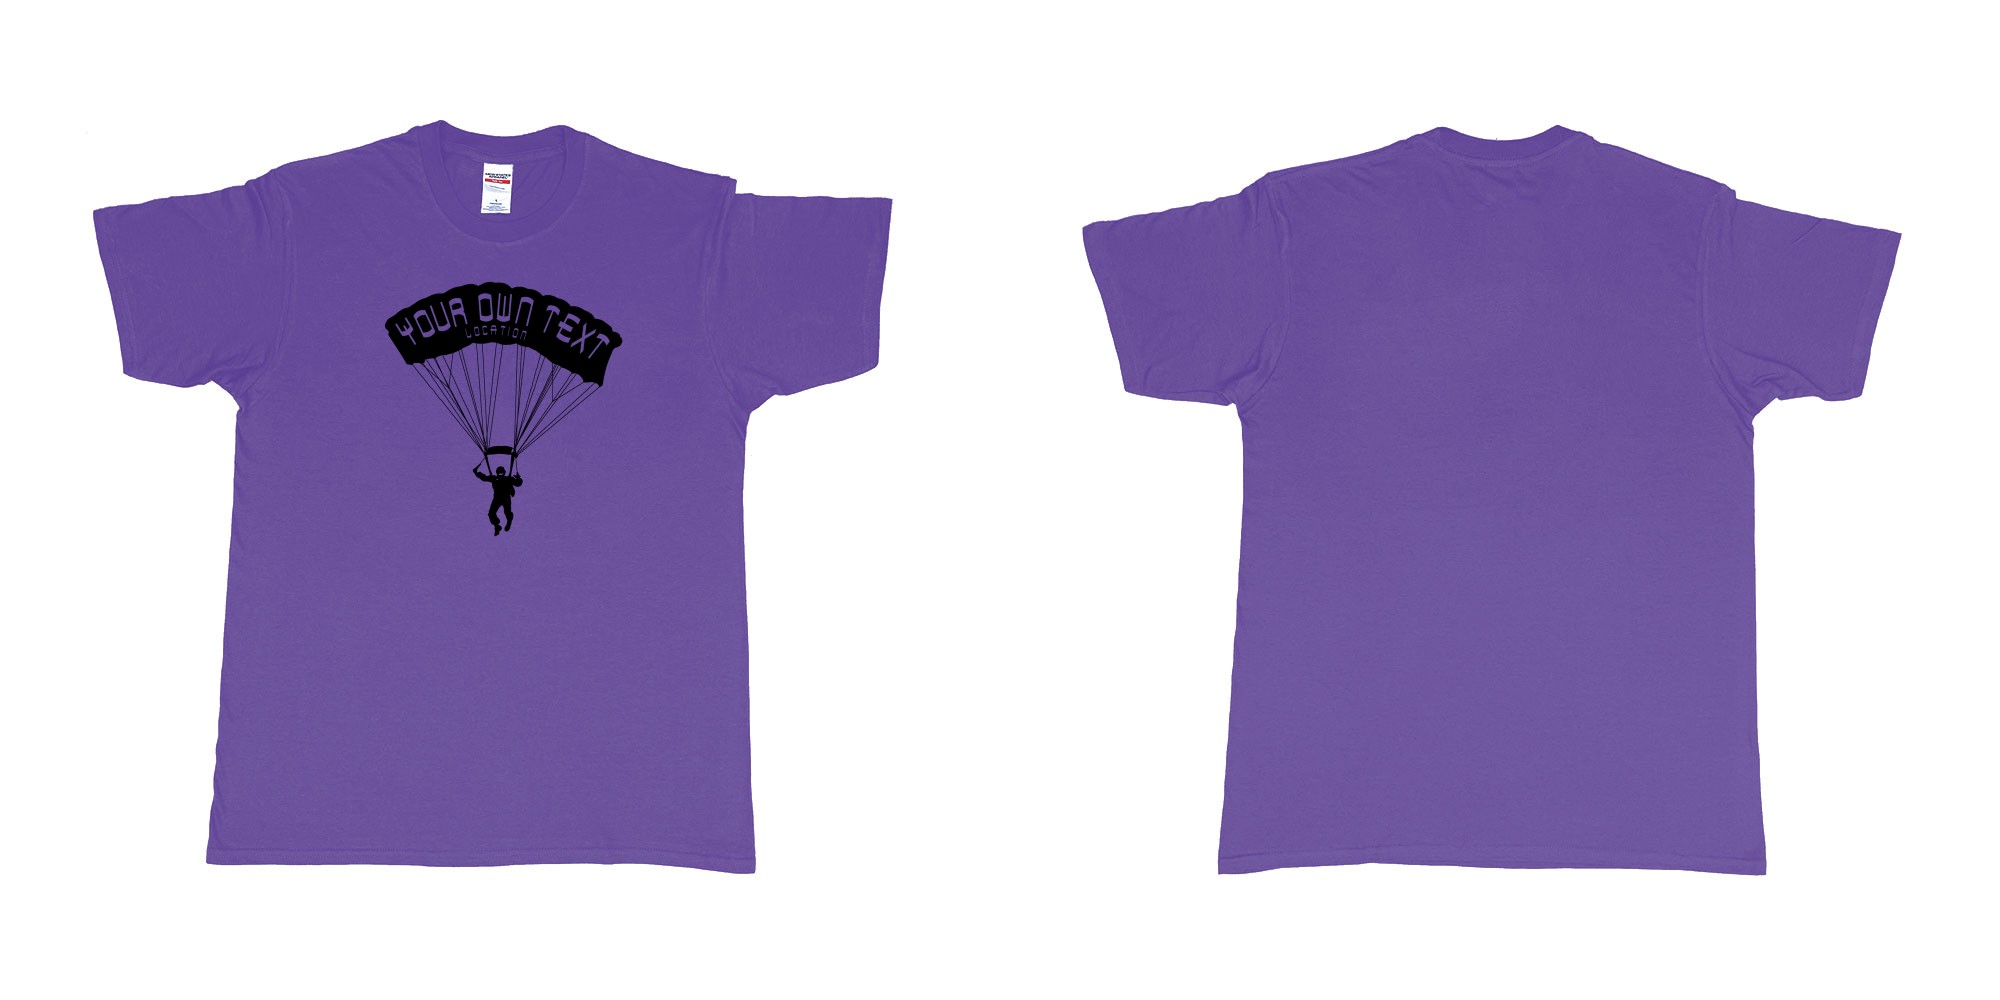 Custom tshirt design skydiver club custom print in fabric color purple choice your own text made in Bali by The Pirate Way